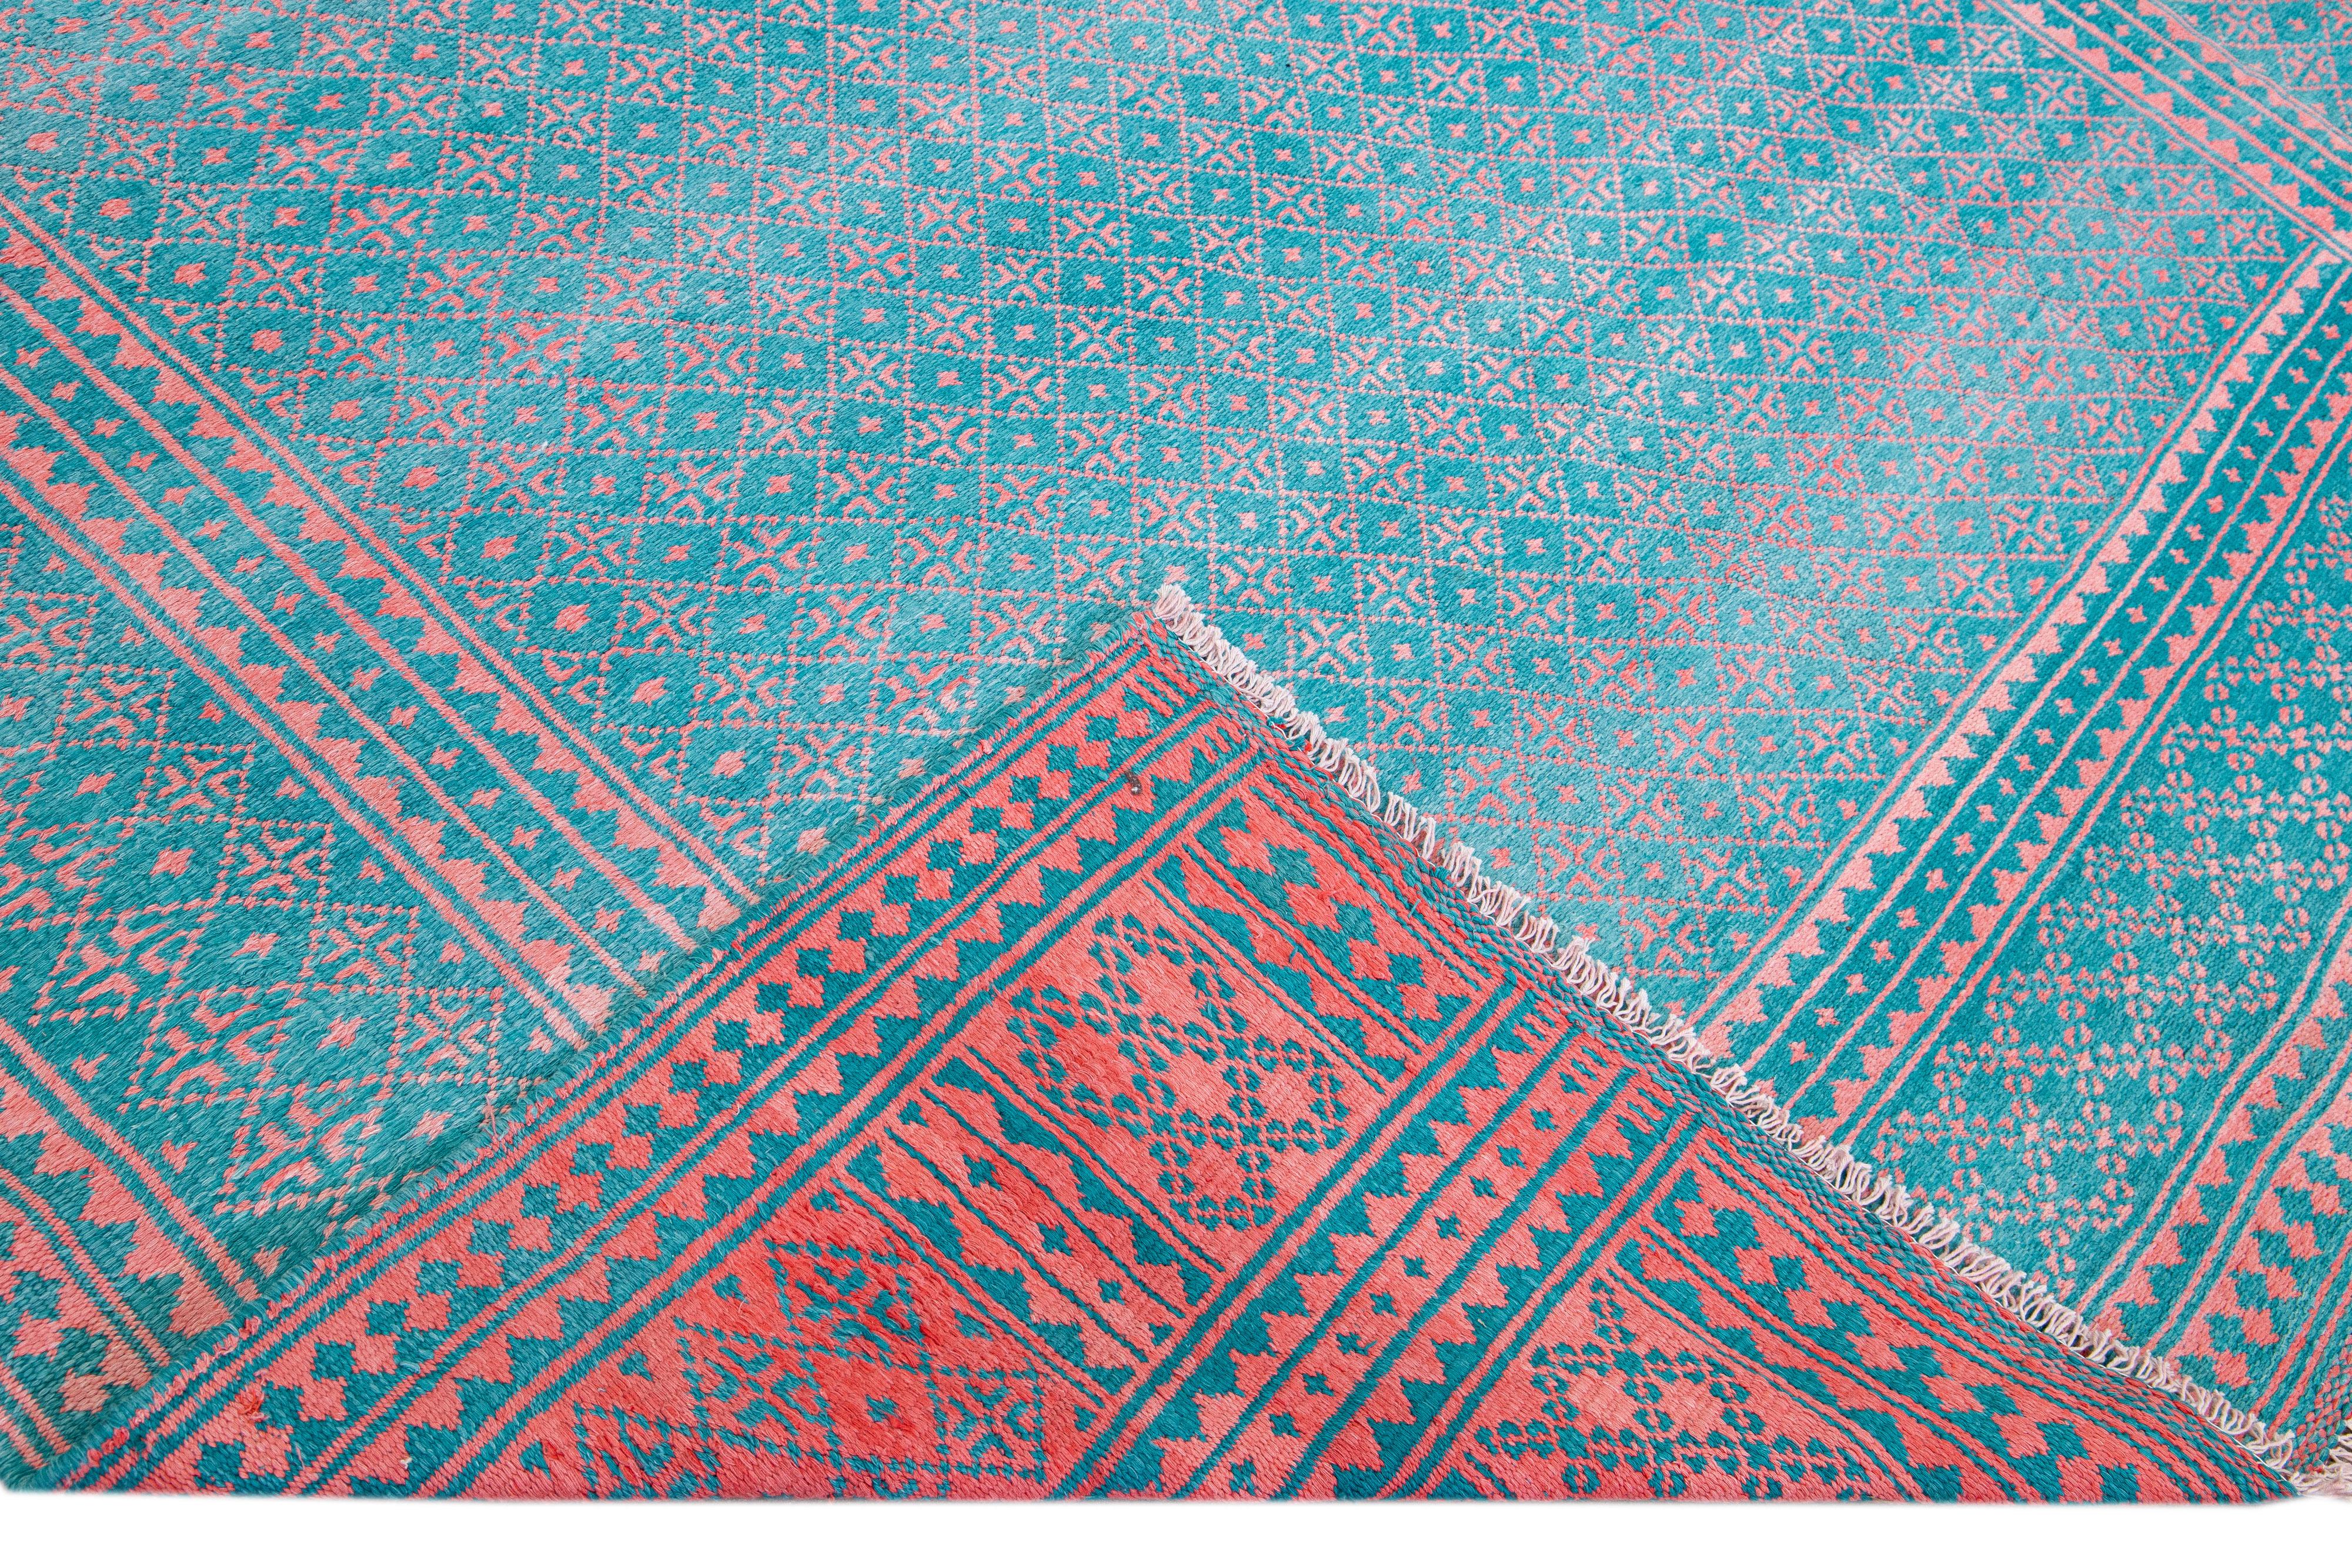 Beautiful Vintage Indian hand-knotted wool and cotton rug with a turquoise field. This vintage rug has pink accents in a gorgeous all-over geometric design.

This rug measures: 8'3